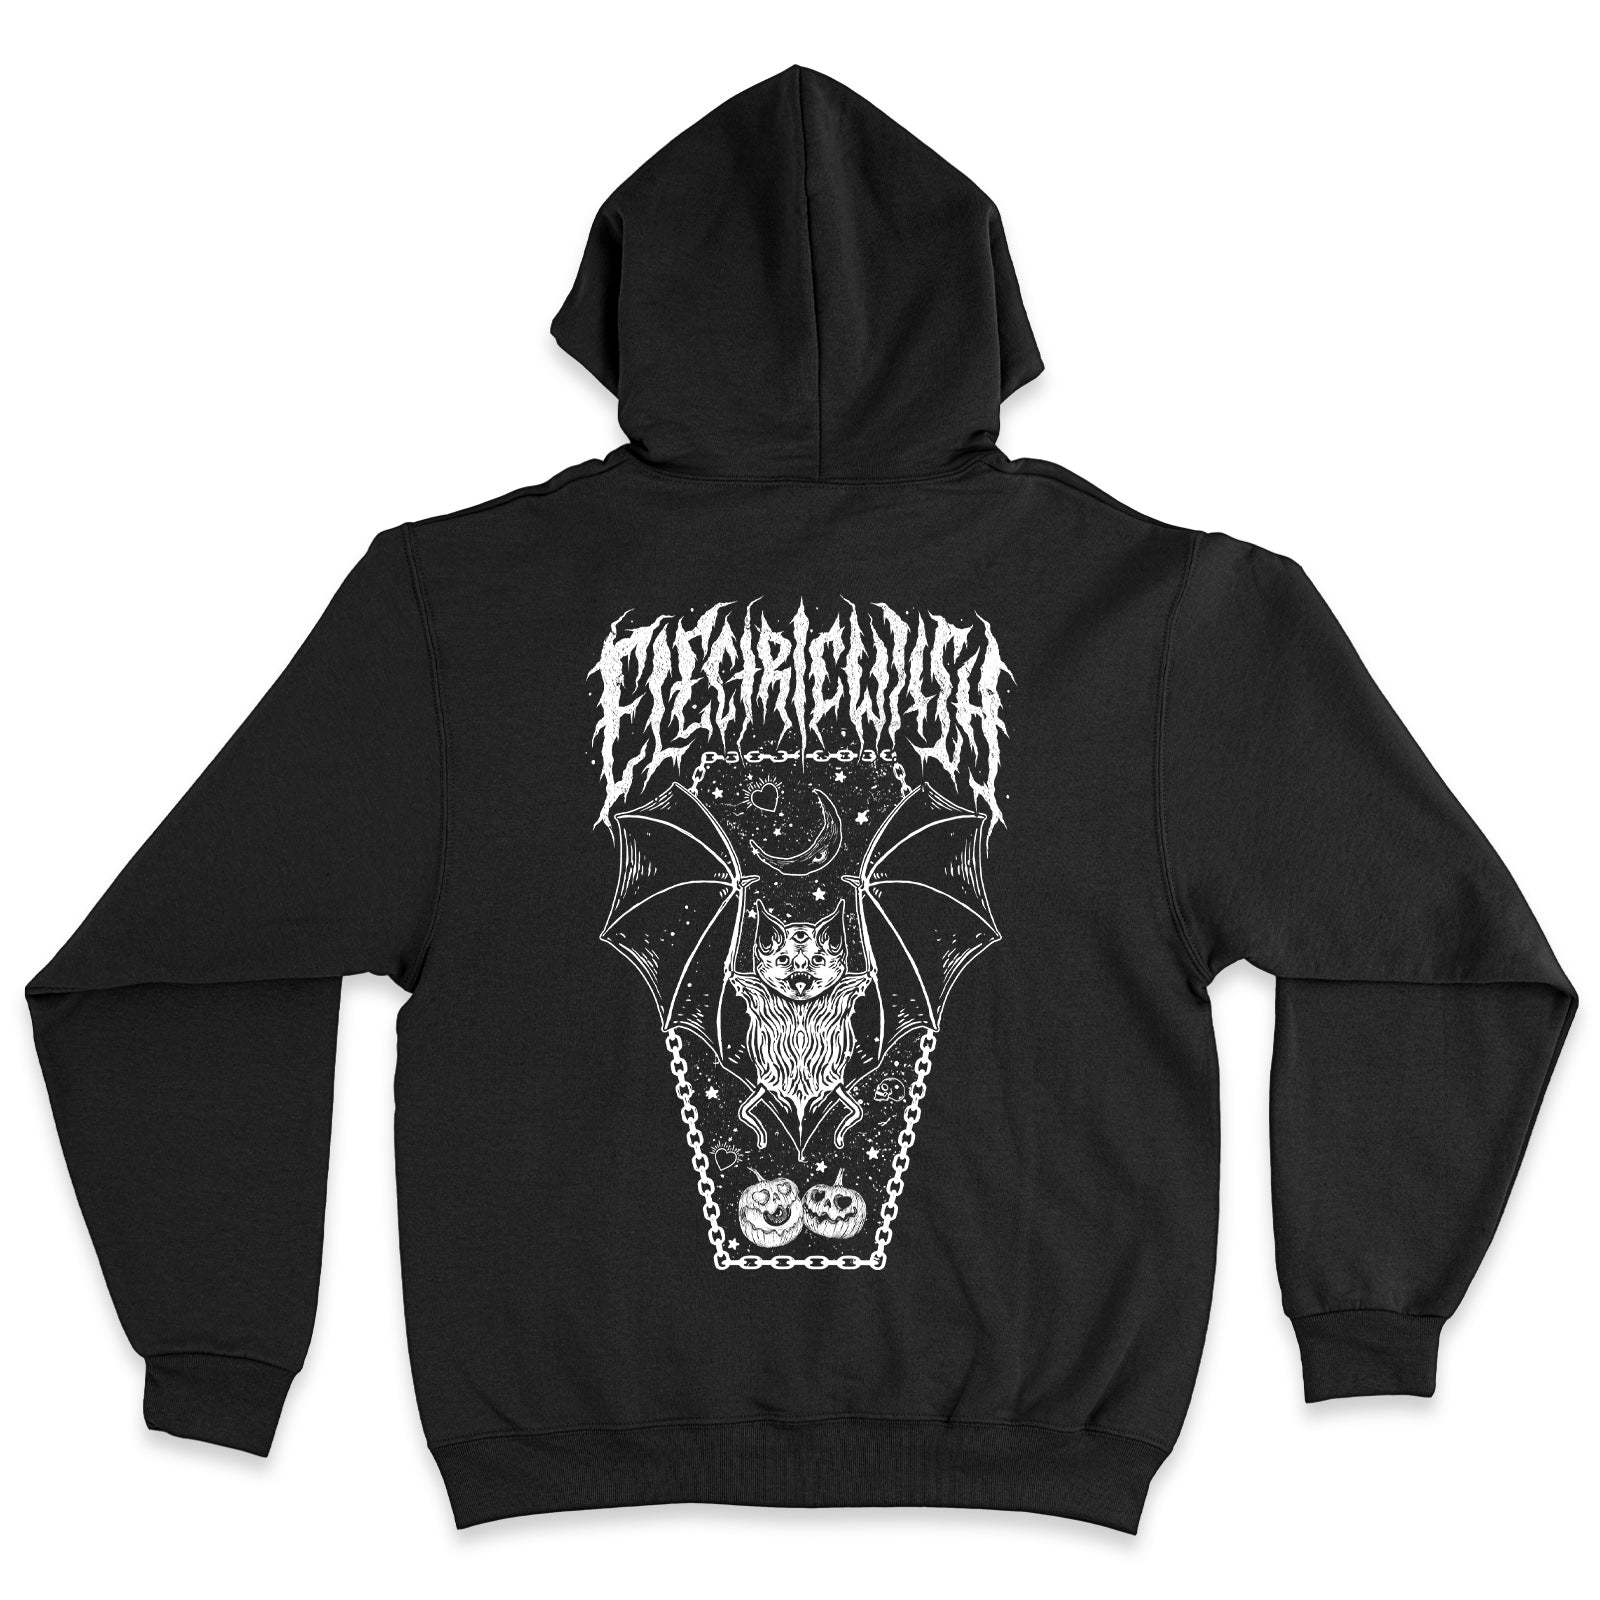 Fright Night Pullover Hoodie